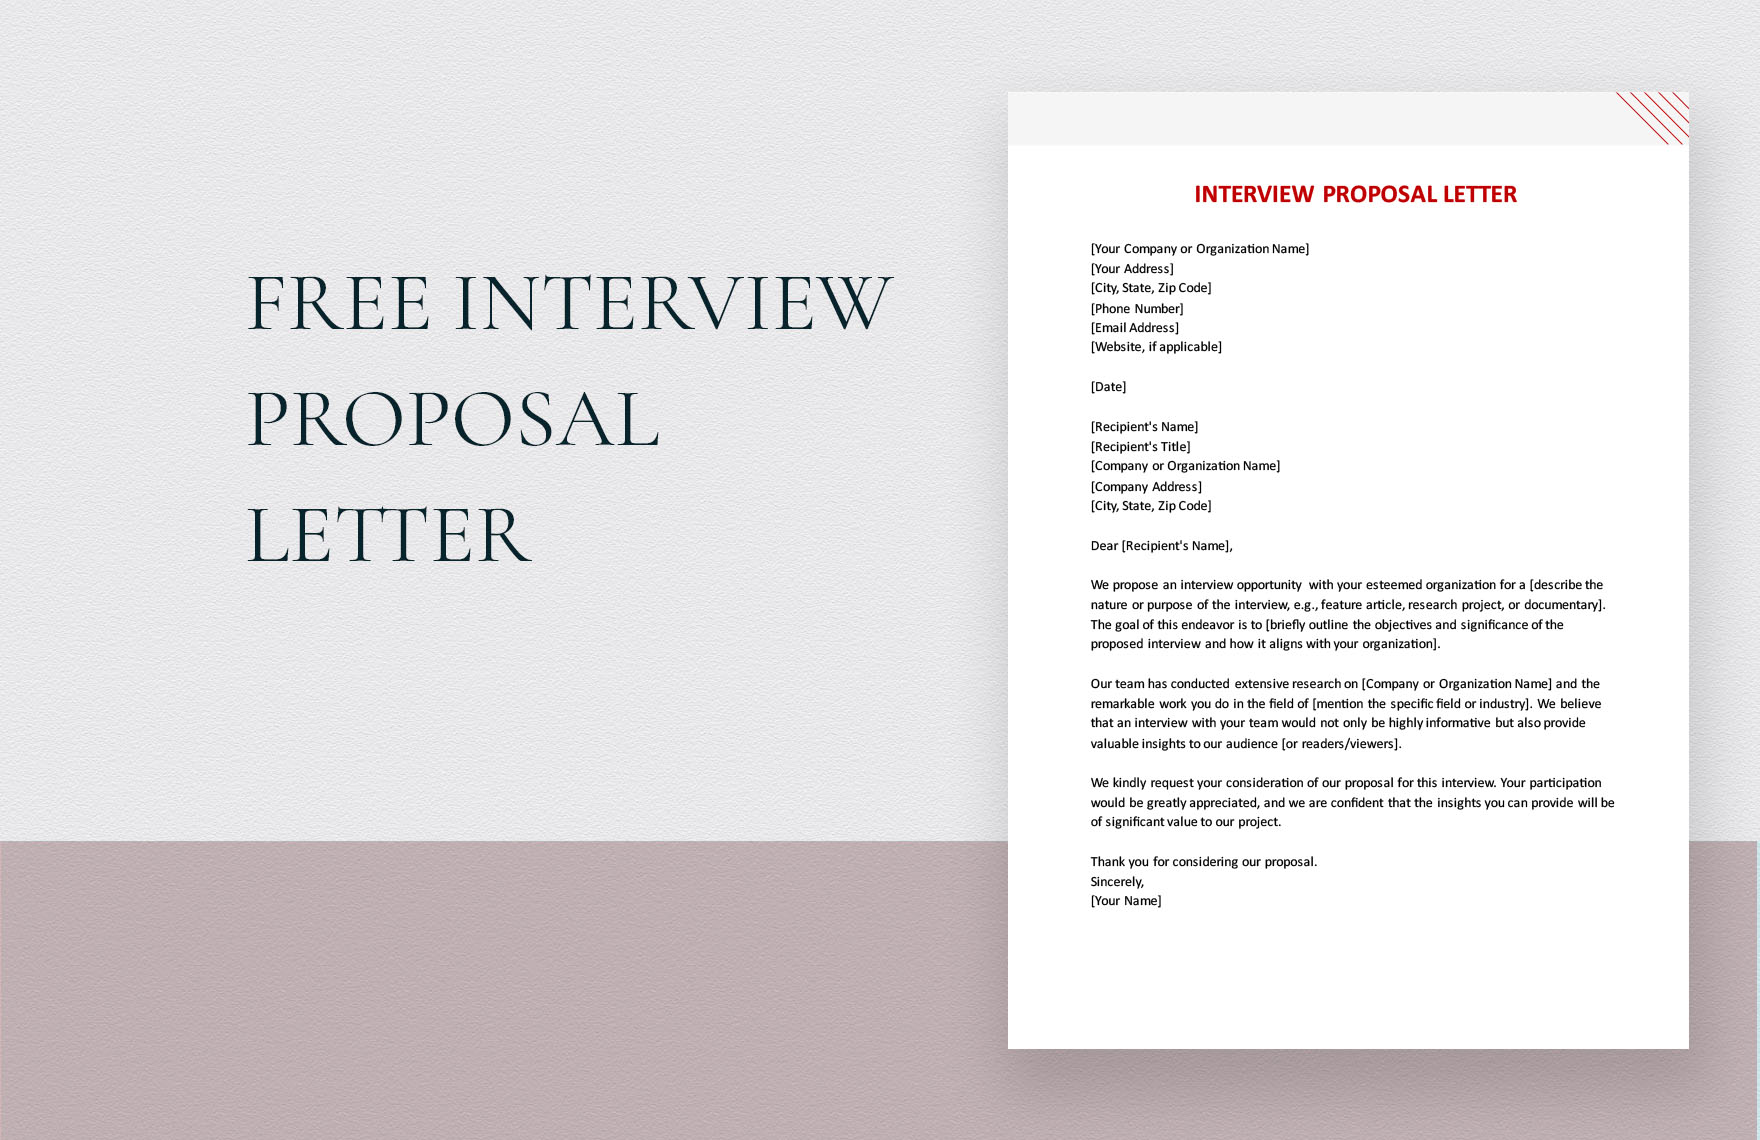 Free Interview Proposal Letter